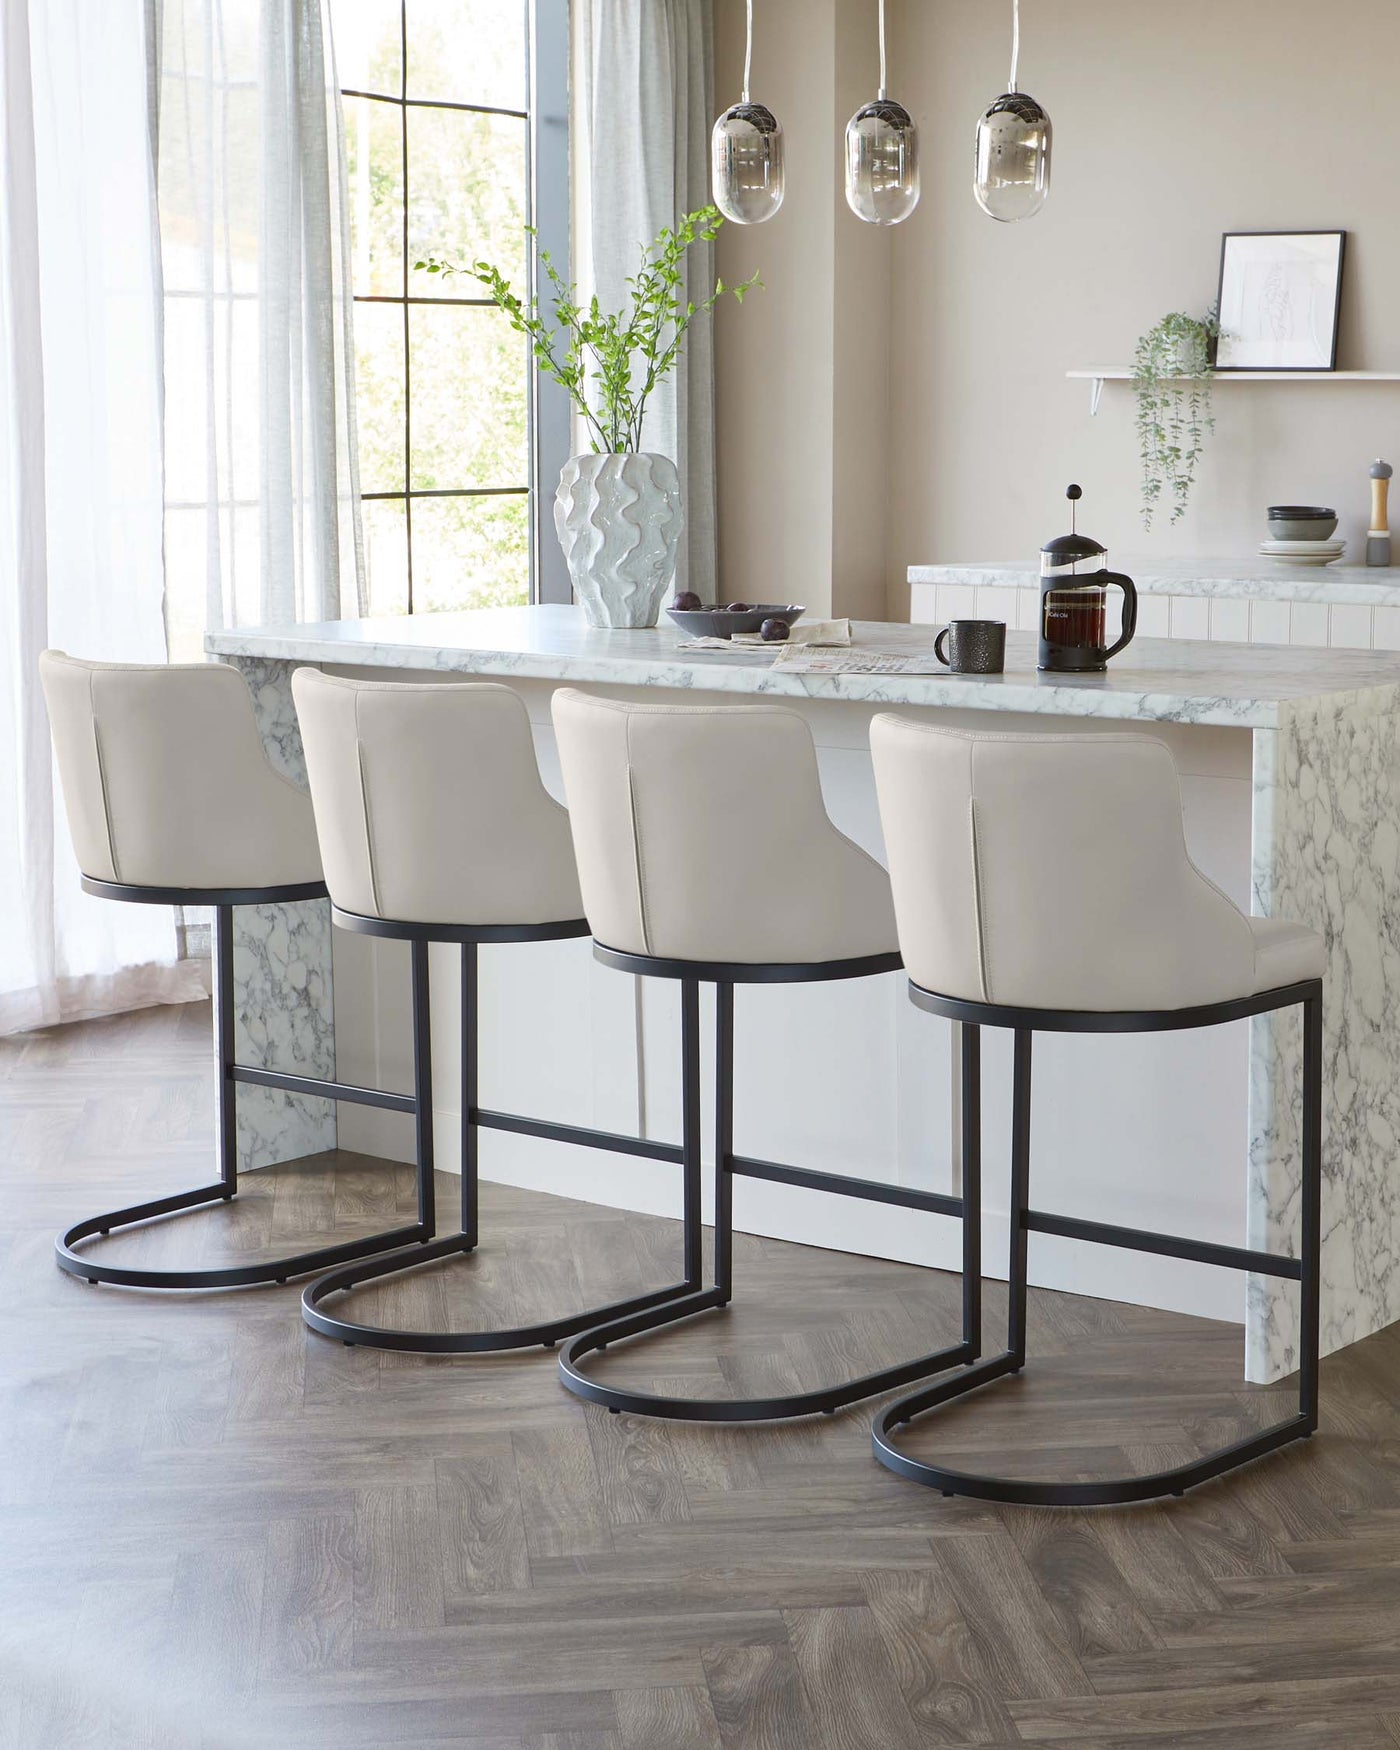 A set of four modern, elegant bar stools with cream-colored upholstered seats and curved backs, featuring slim black metal frames with a distinctive footrest design. Set along a marble kitchen island in a contemporary styled room.